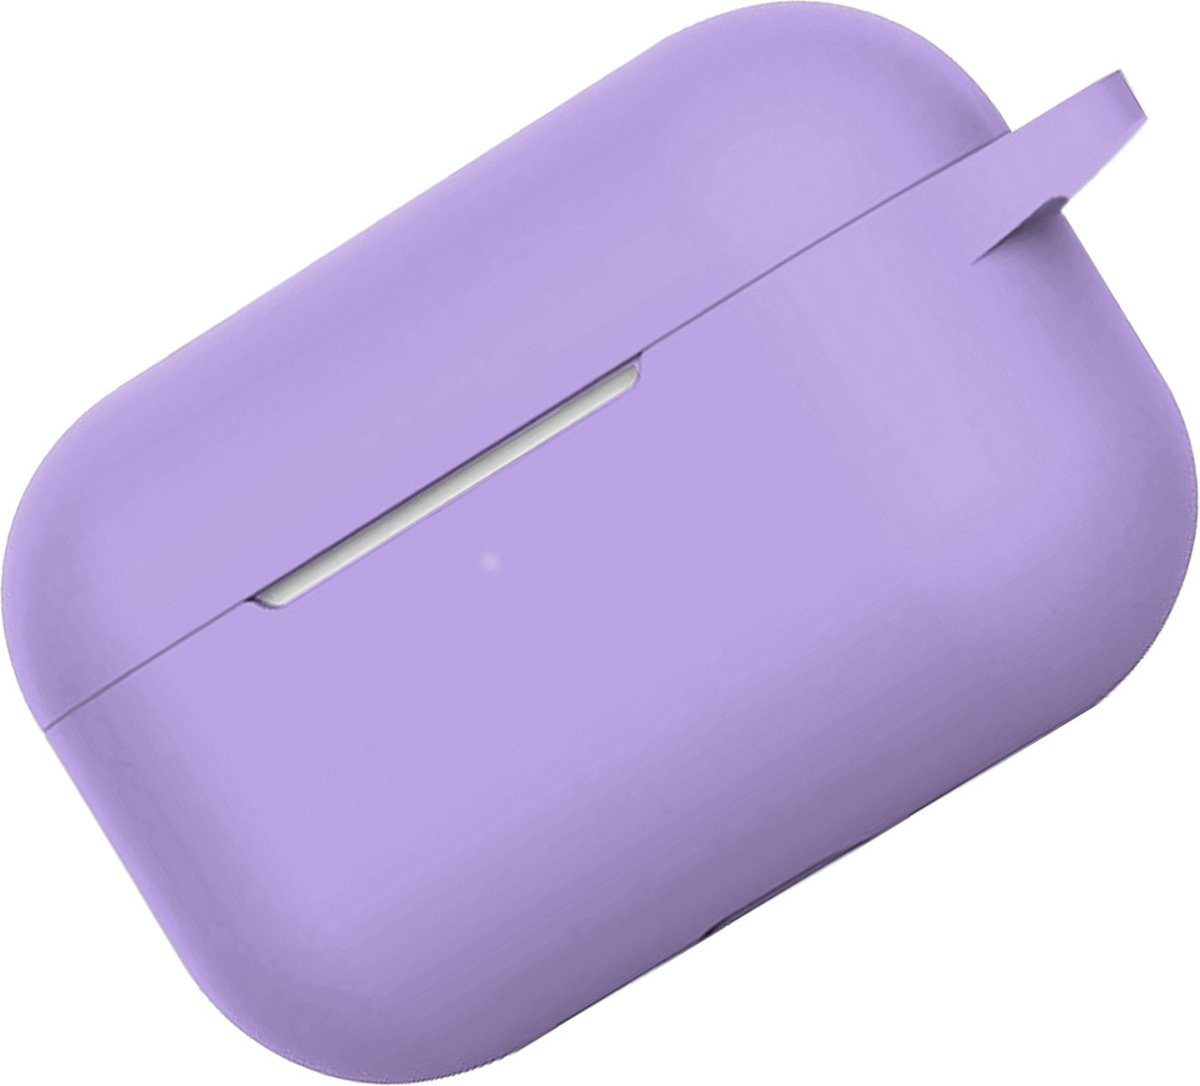 Hoes Geschikt voor AirPods Pro 2 Hoesje Cover Silicone Case Hoes - Lila